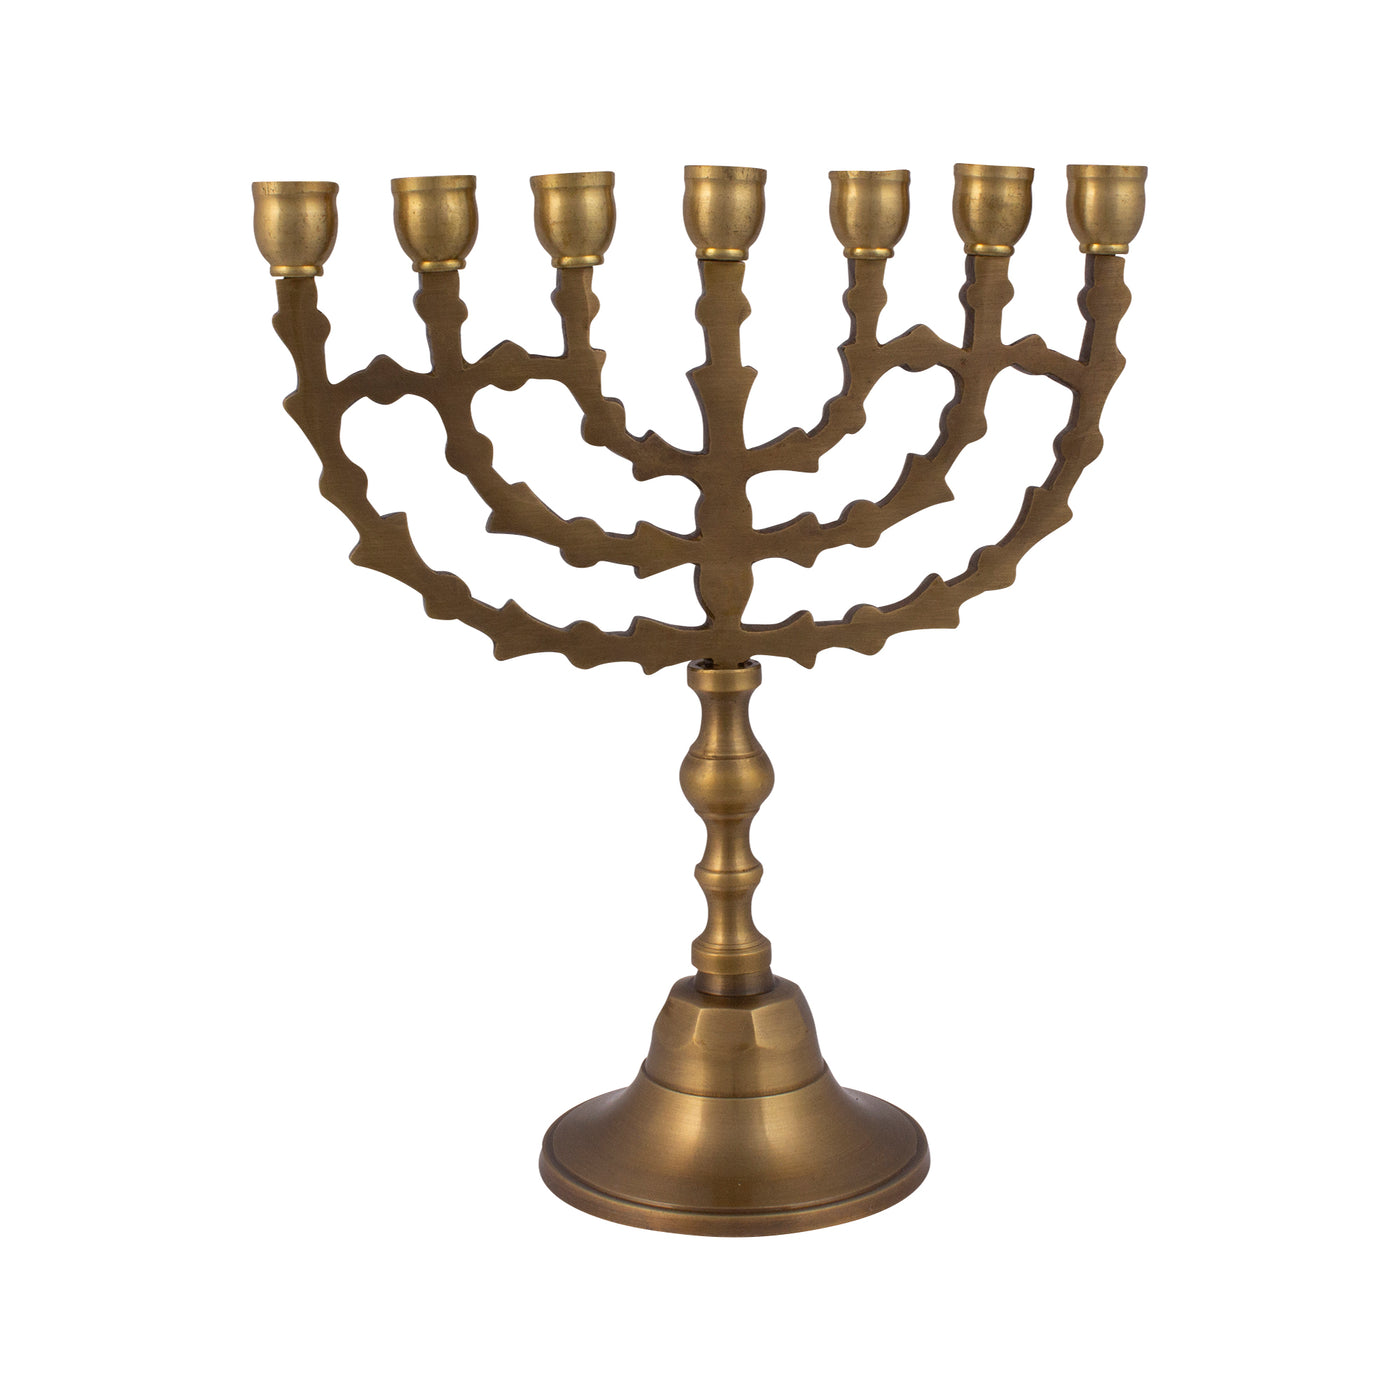 Menorah decorated with leaves bronze finish 8 inches - 20 cm